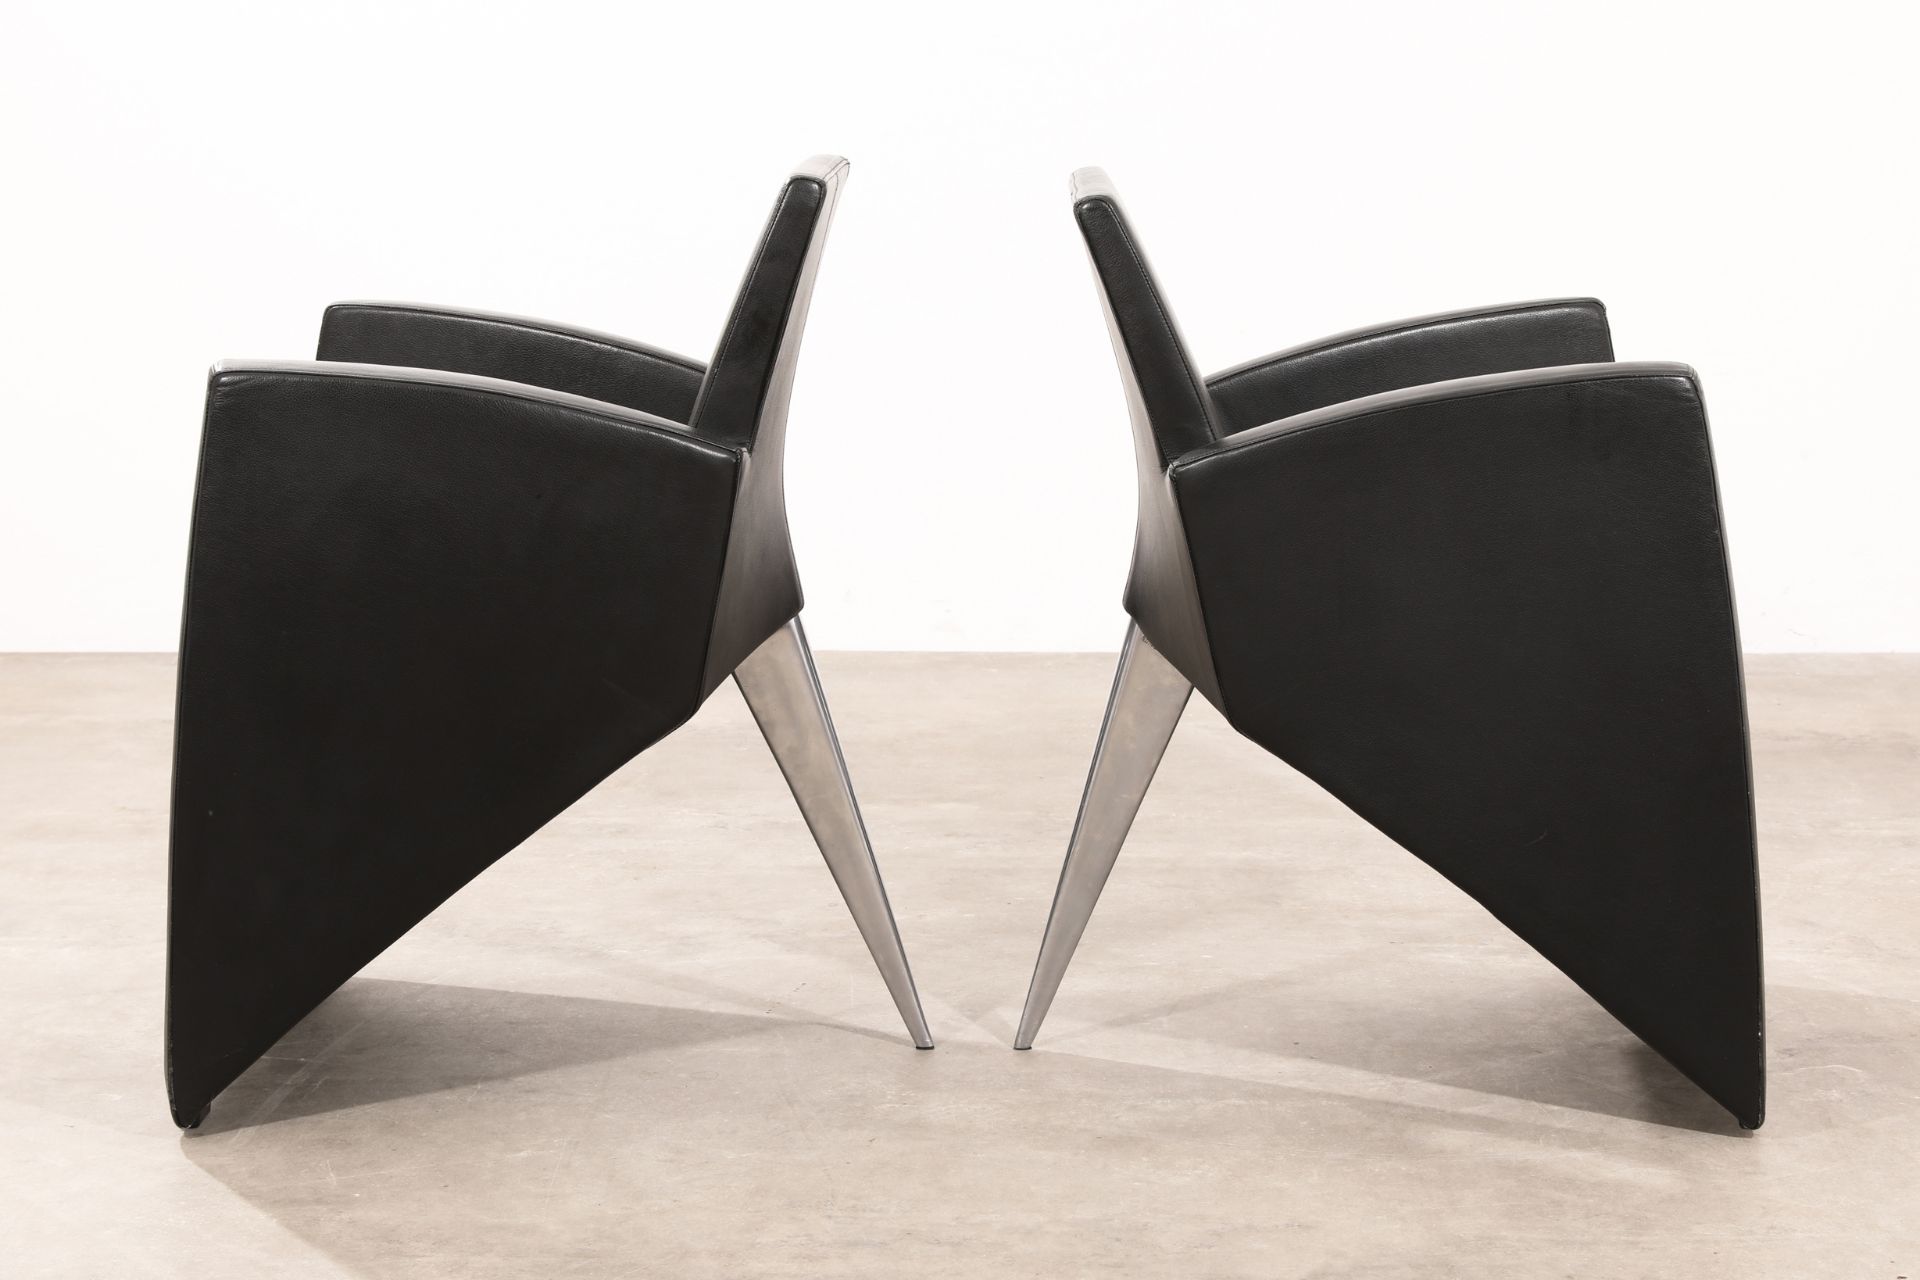 Philippe Starck, Aleph, 2 Chairs, model J. Lang - Image 3 of 5